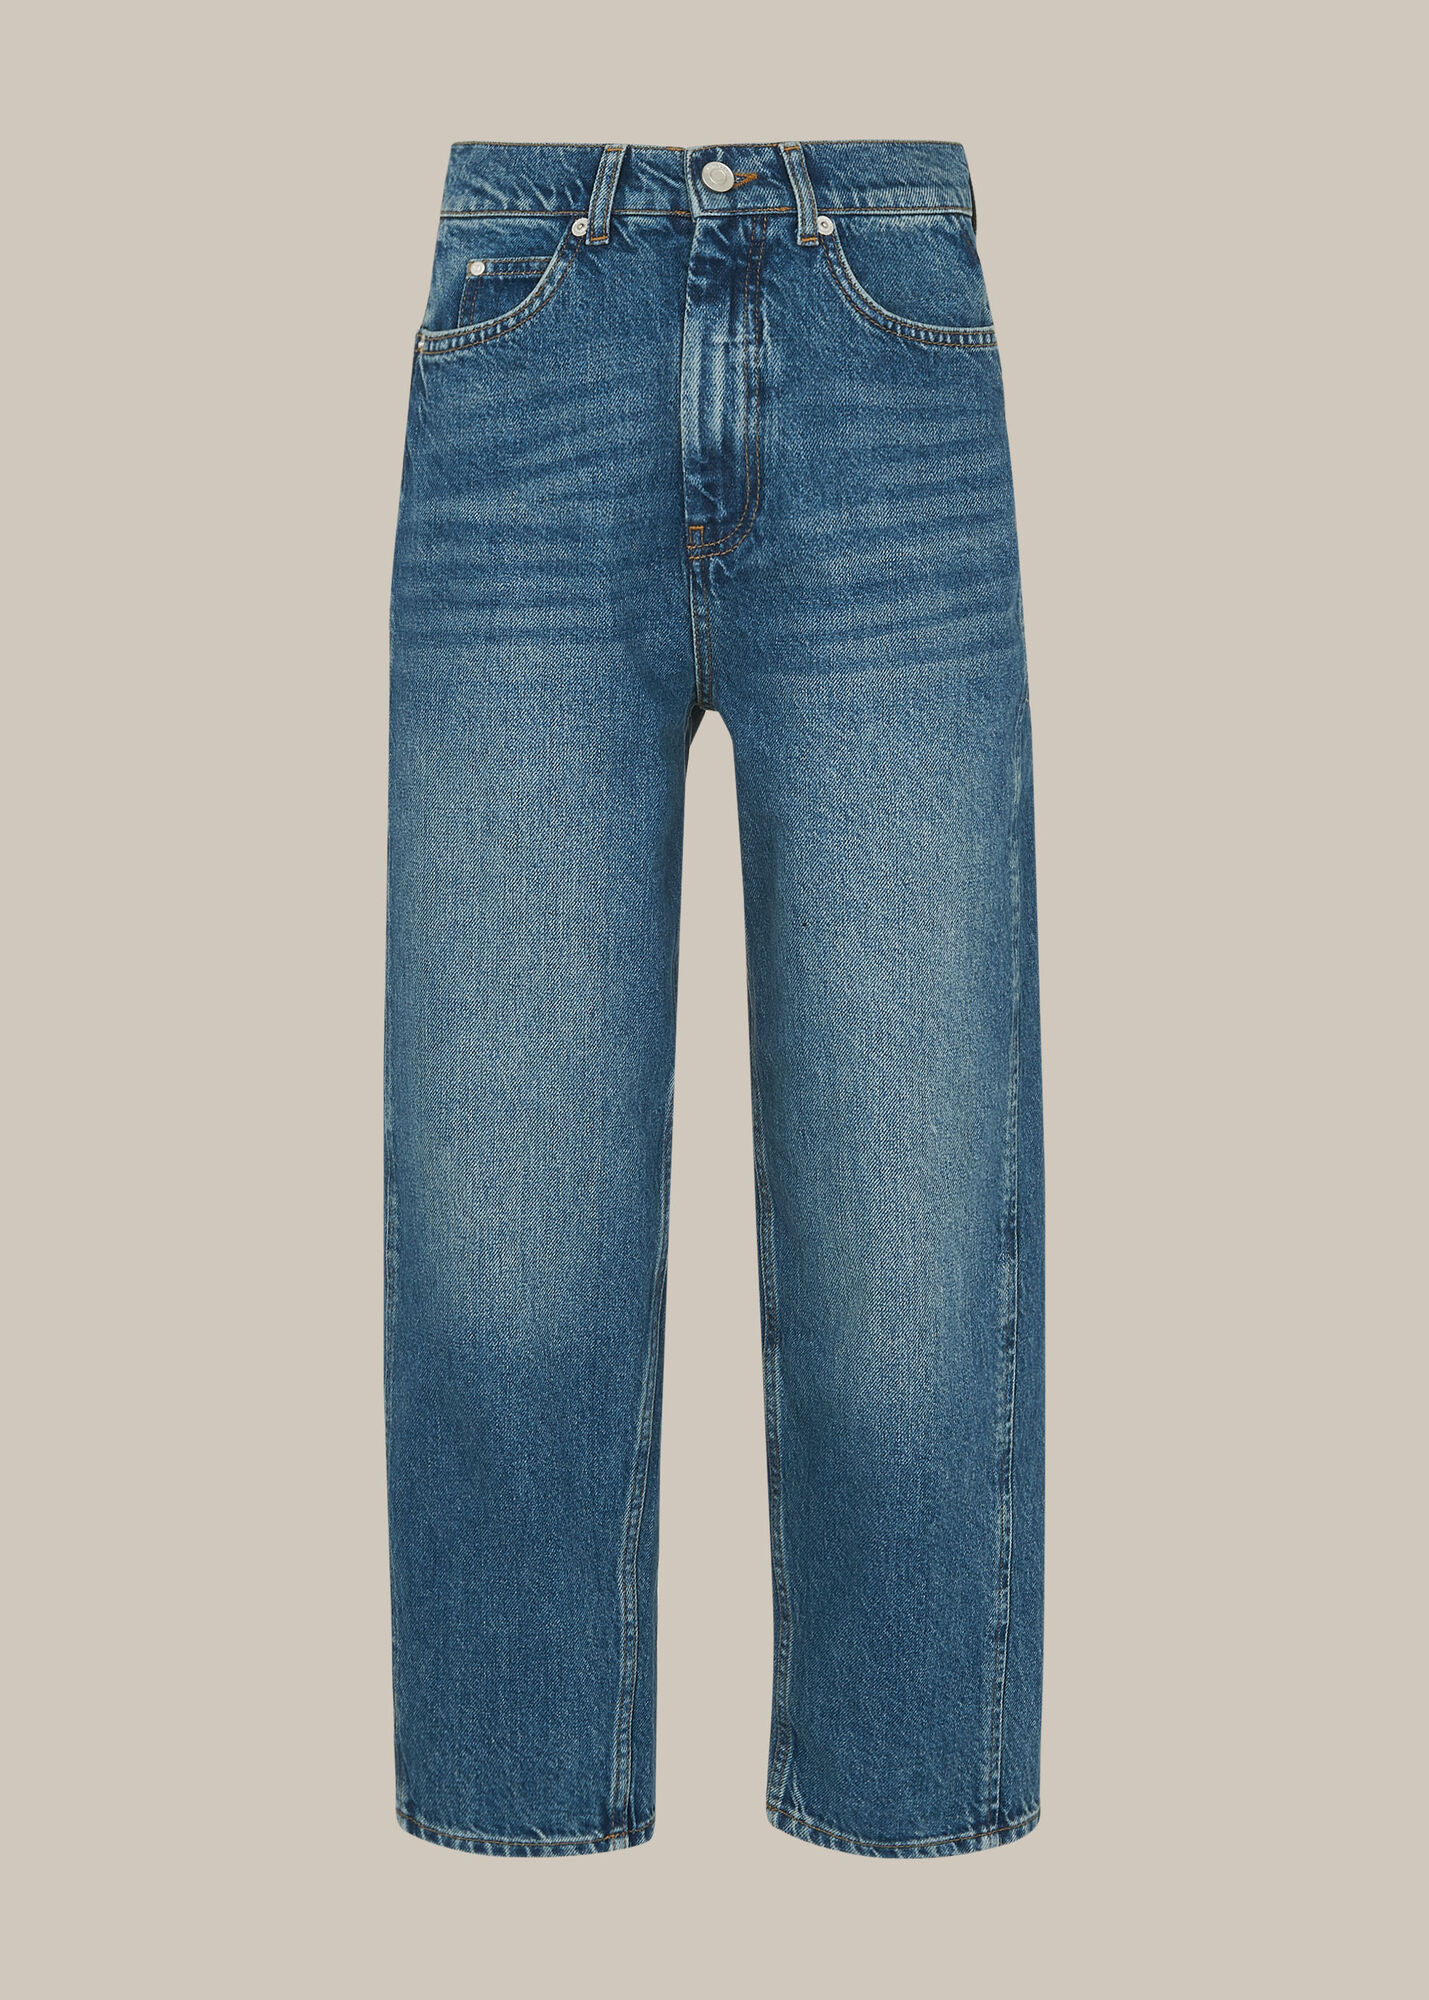 Denim Authentic Washed Barrel Jean | WHISTLES